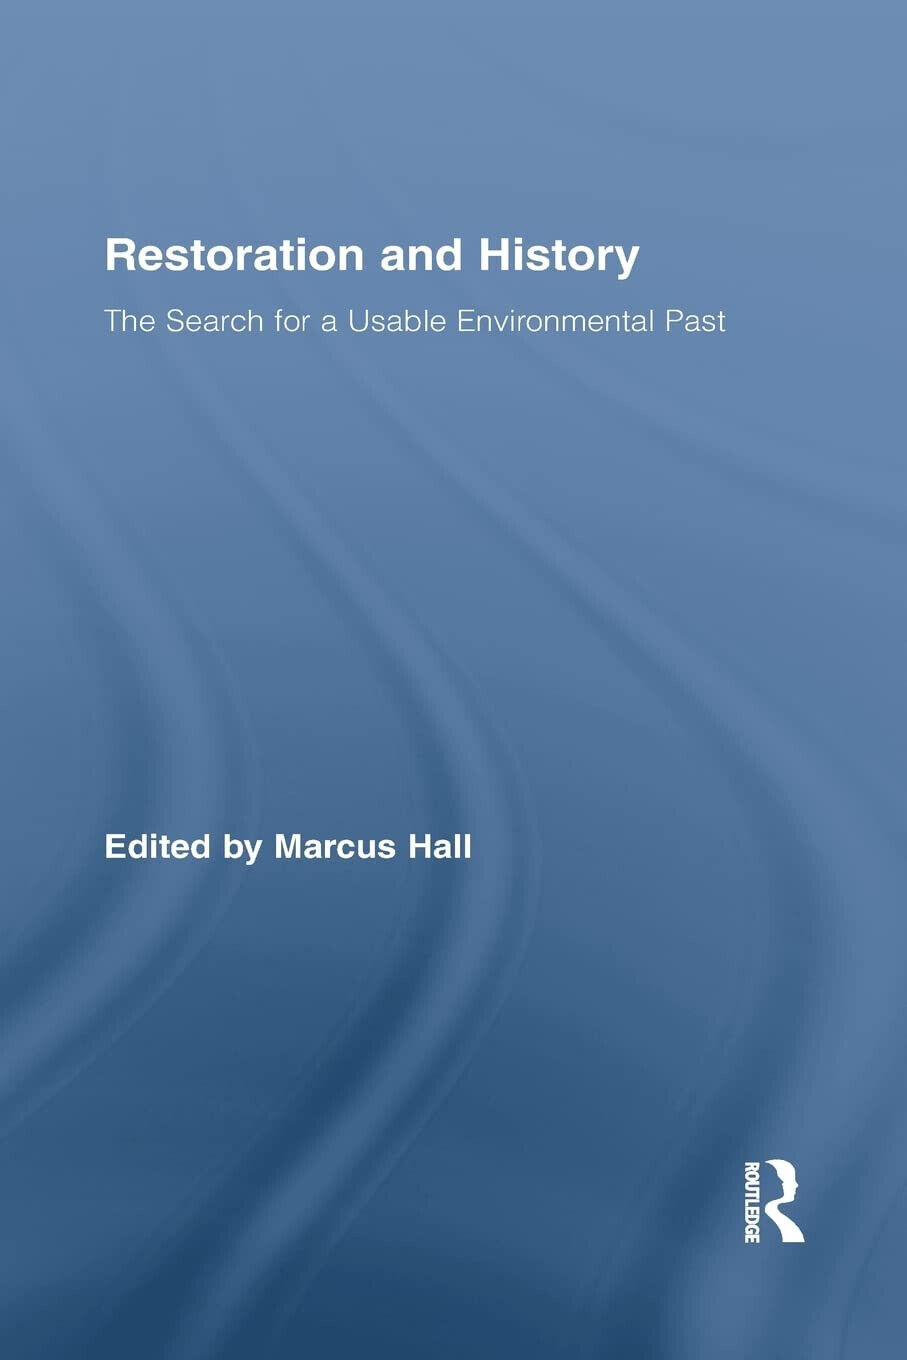 Restoration and History - Marcus Hall - ROUTLEDGE, 2015 libro usato